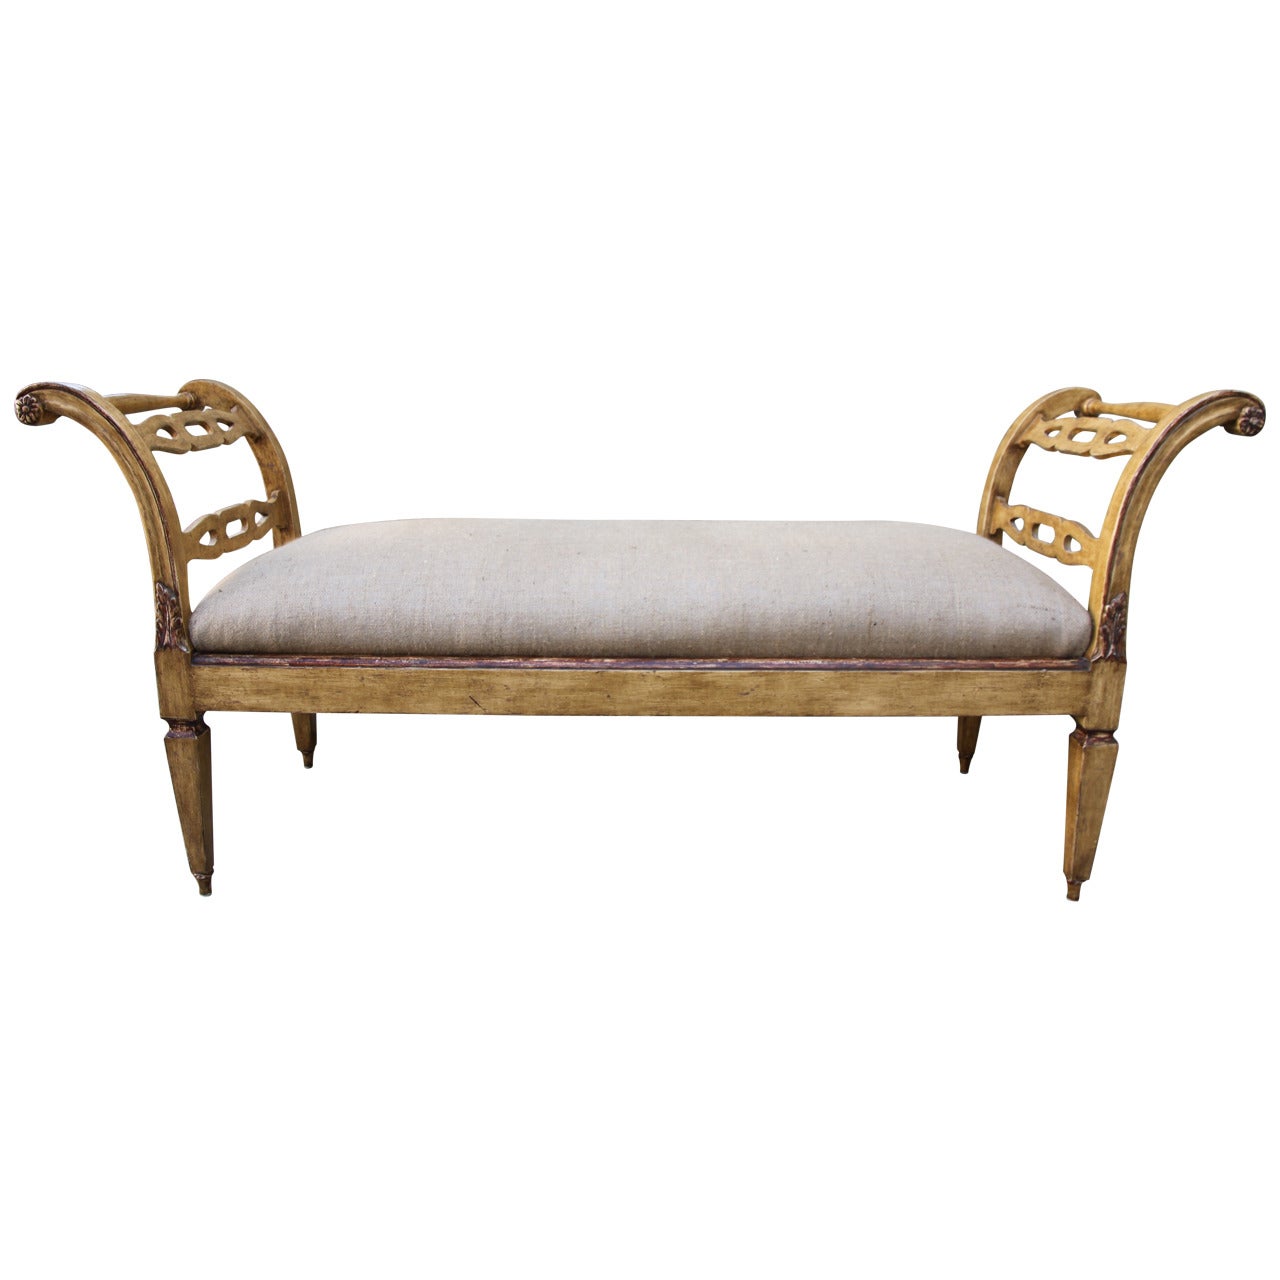 Italian Panted and Parcel-Gilt Bench